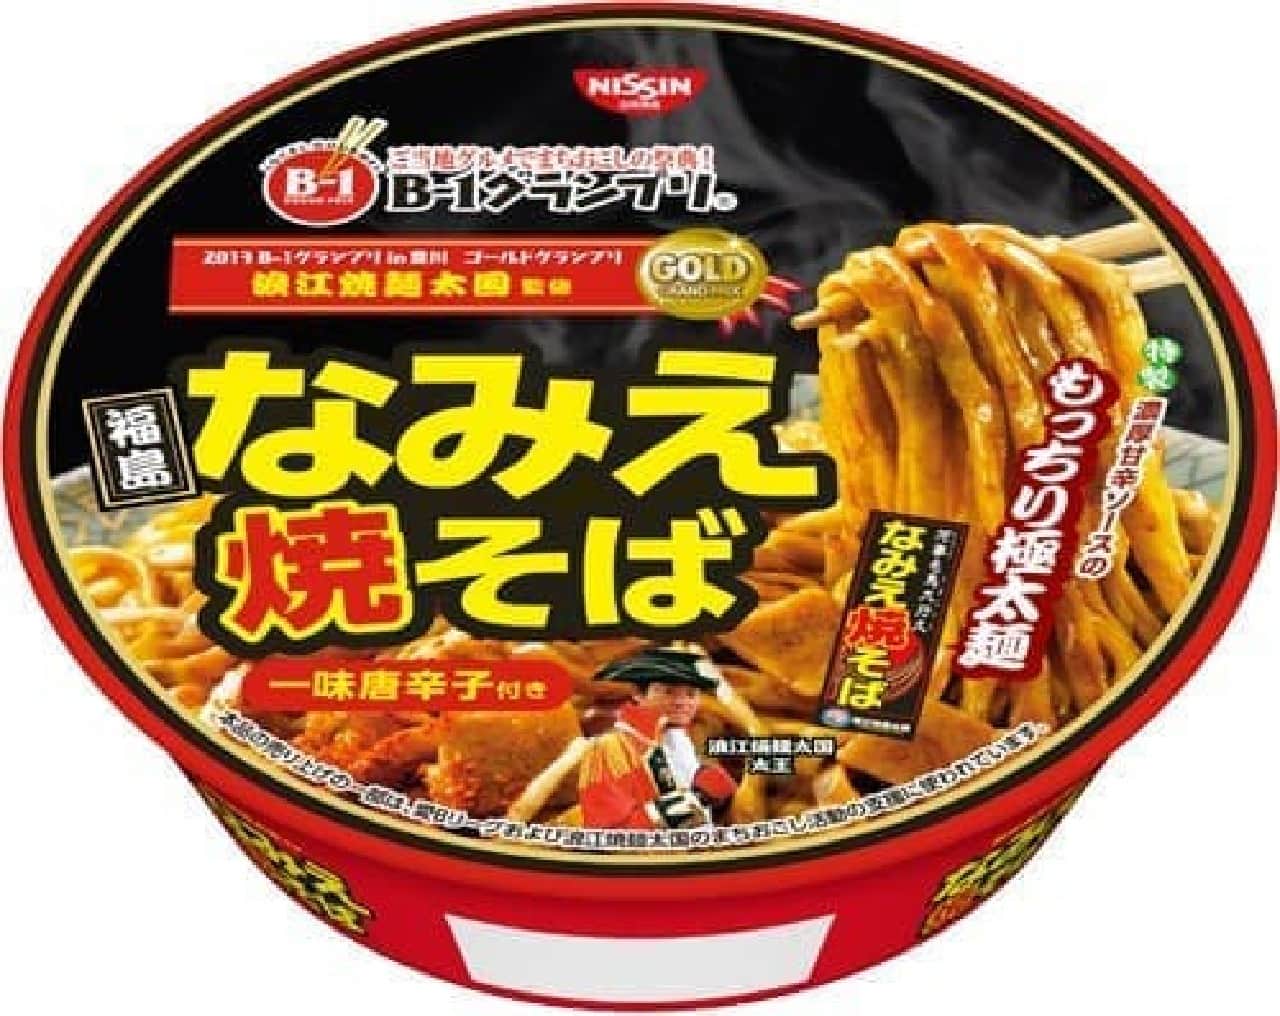 That "Namie Yakisoba" has become cup noodles!